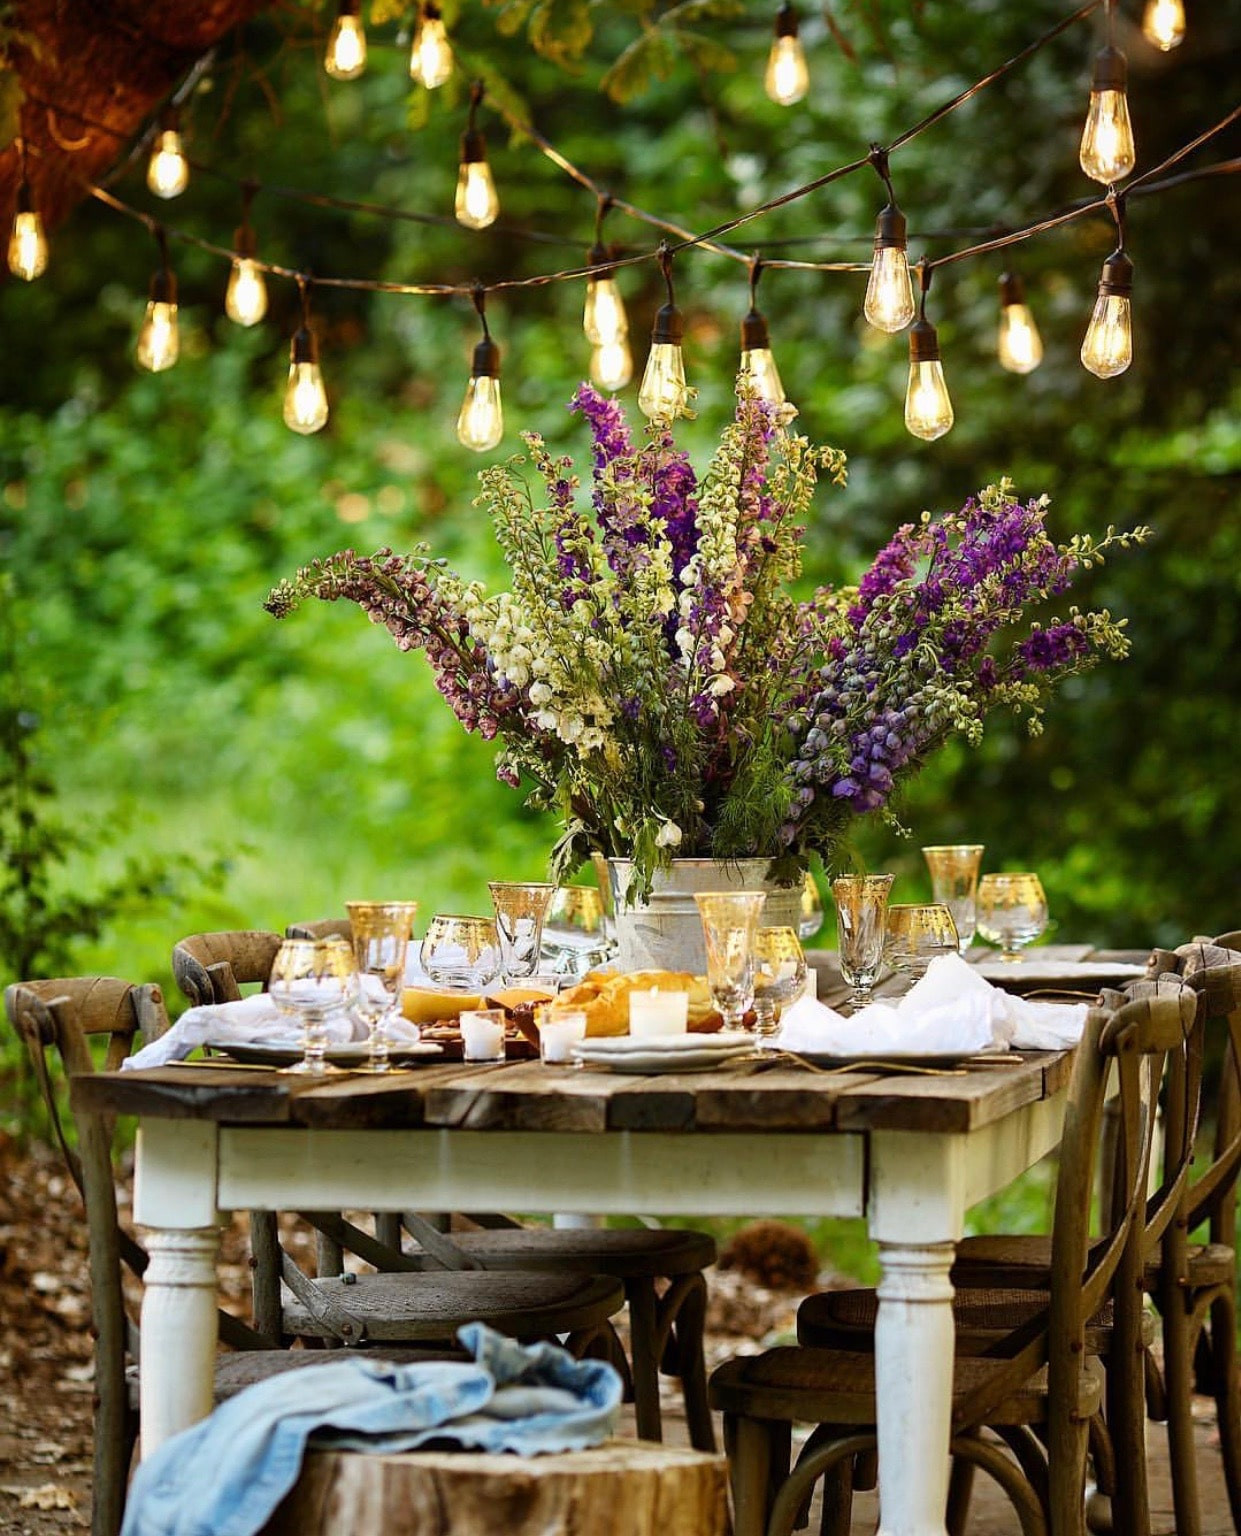 Backyard Party Decorating Ideas Pinterest
 8 Charming outdoor party decoration ideas